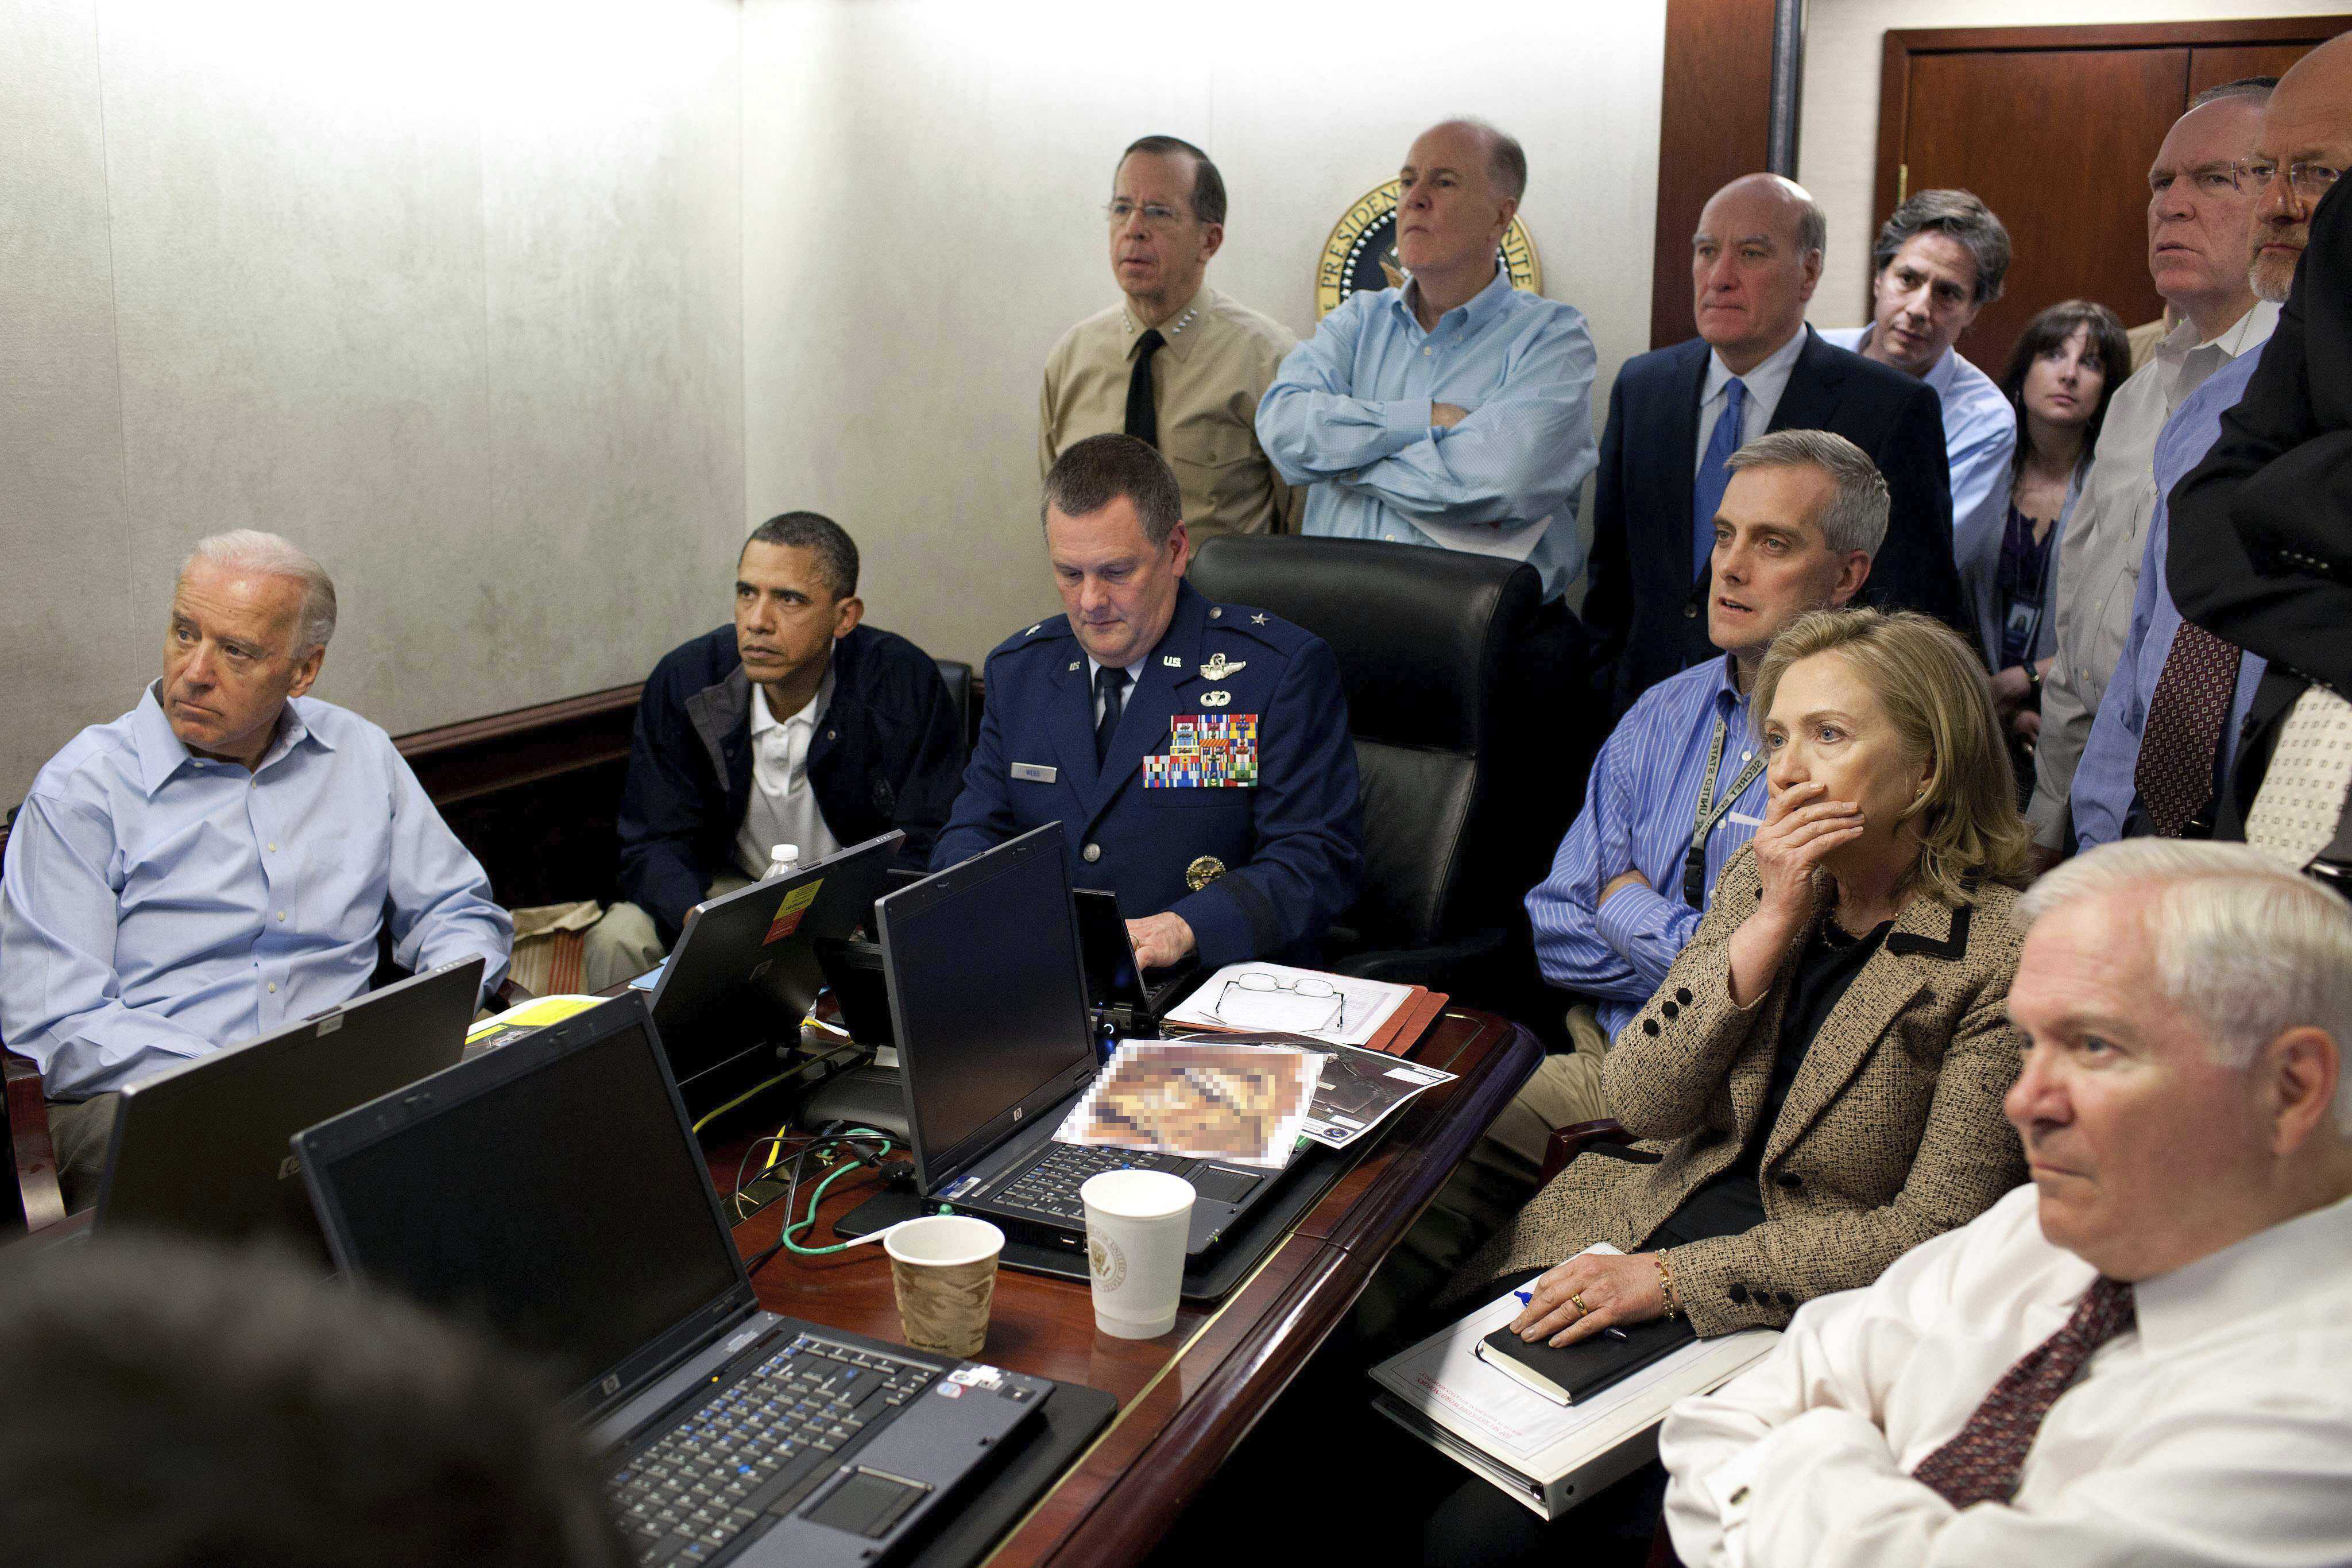 President Barack Obama, Secretary of State Hillary Clinton and Vice President Joe Biden, along with with members of the national security team, receive an update on the special forces raid on Osama bin Laden in the Situation Room of the White House. Bin Laden was killed in Pakistan on May 2, 2011 during a Navy SEAL operation, after the US intelligence services had tracked down the then most wanted man in the world.